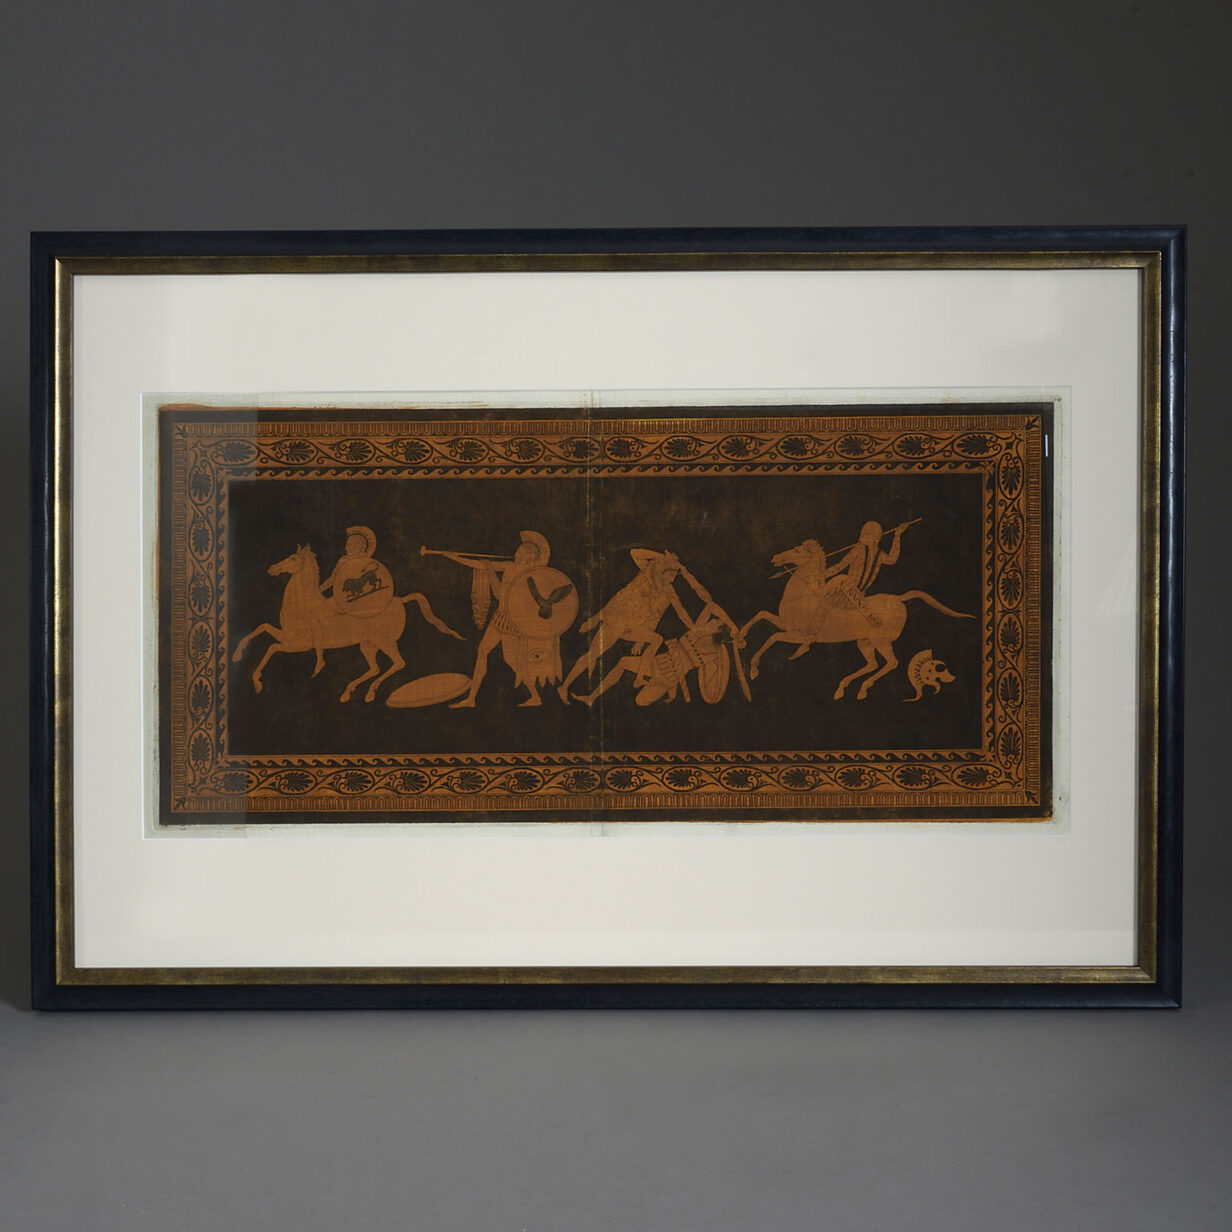 Four hand-coloured aquatint engravings from sir william hamilton's collection of etruscan, greek, and roman antiquities